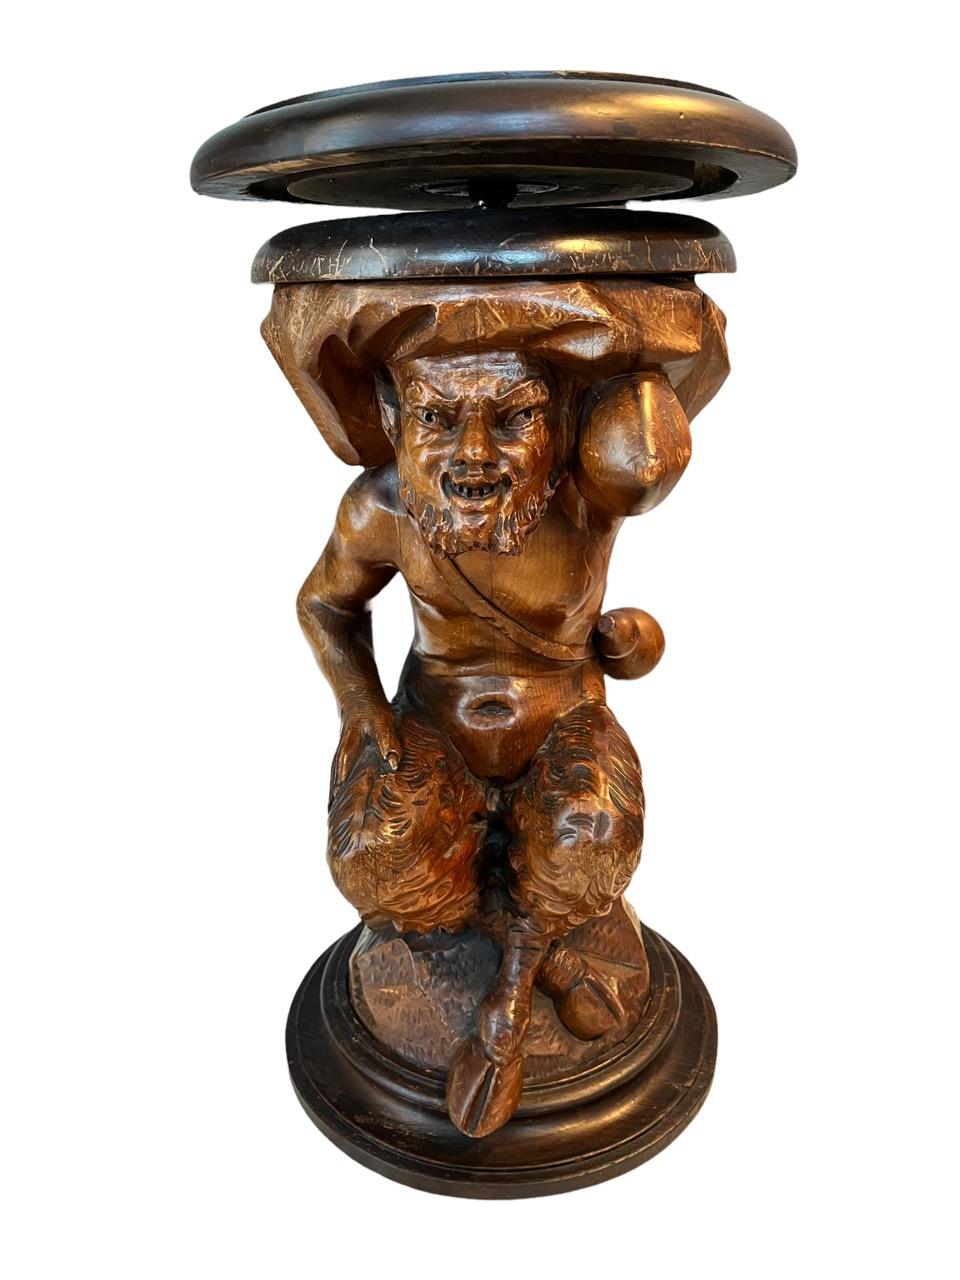 19th Century carved walnut piano stool, Black Forest in the shape of a faun, which is a mythological half human half goat creature from Roman mythology. The height is adjustable to up to 31in high.
 